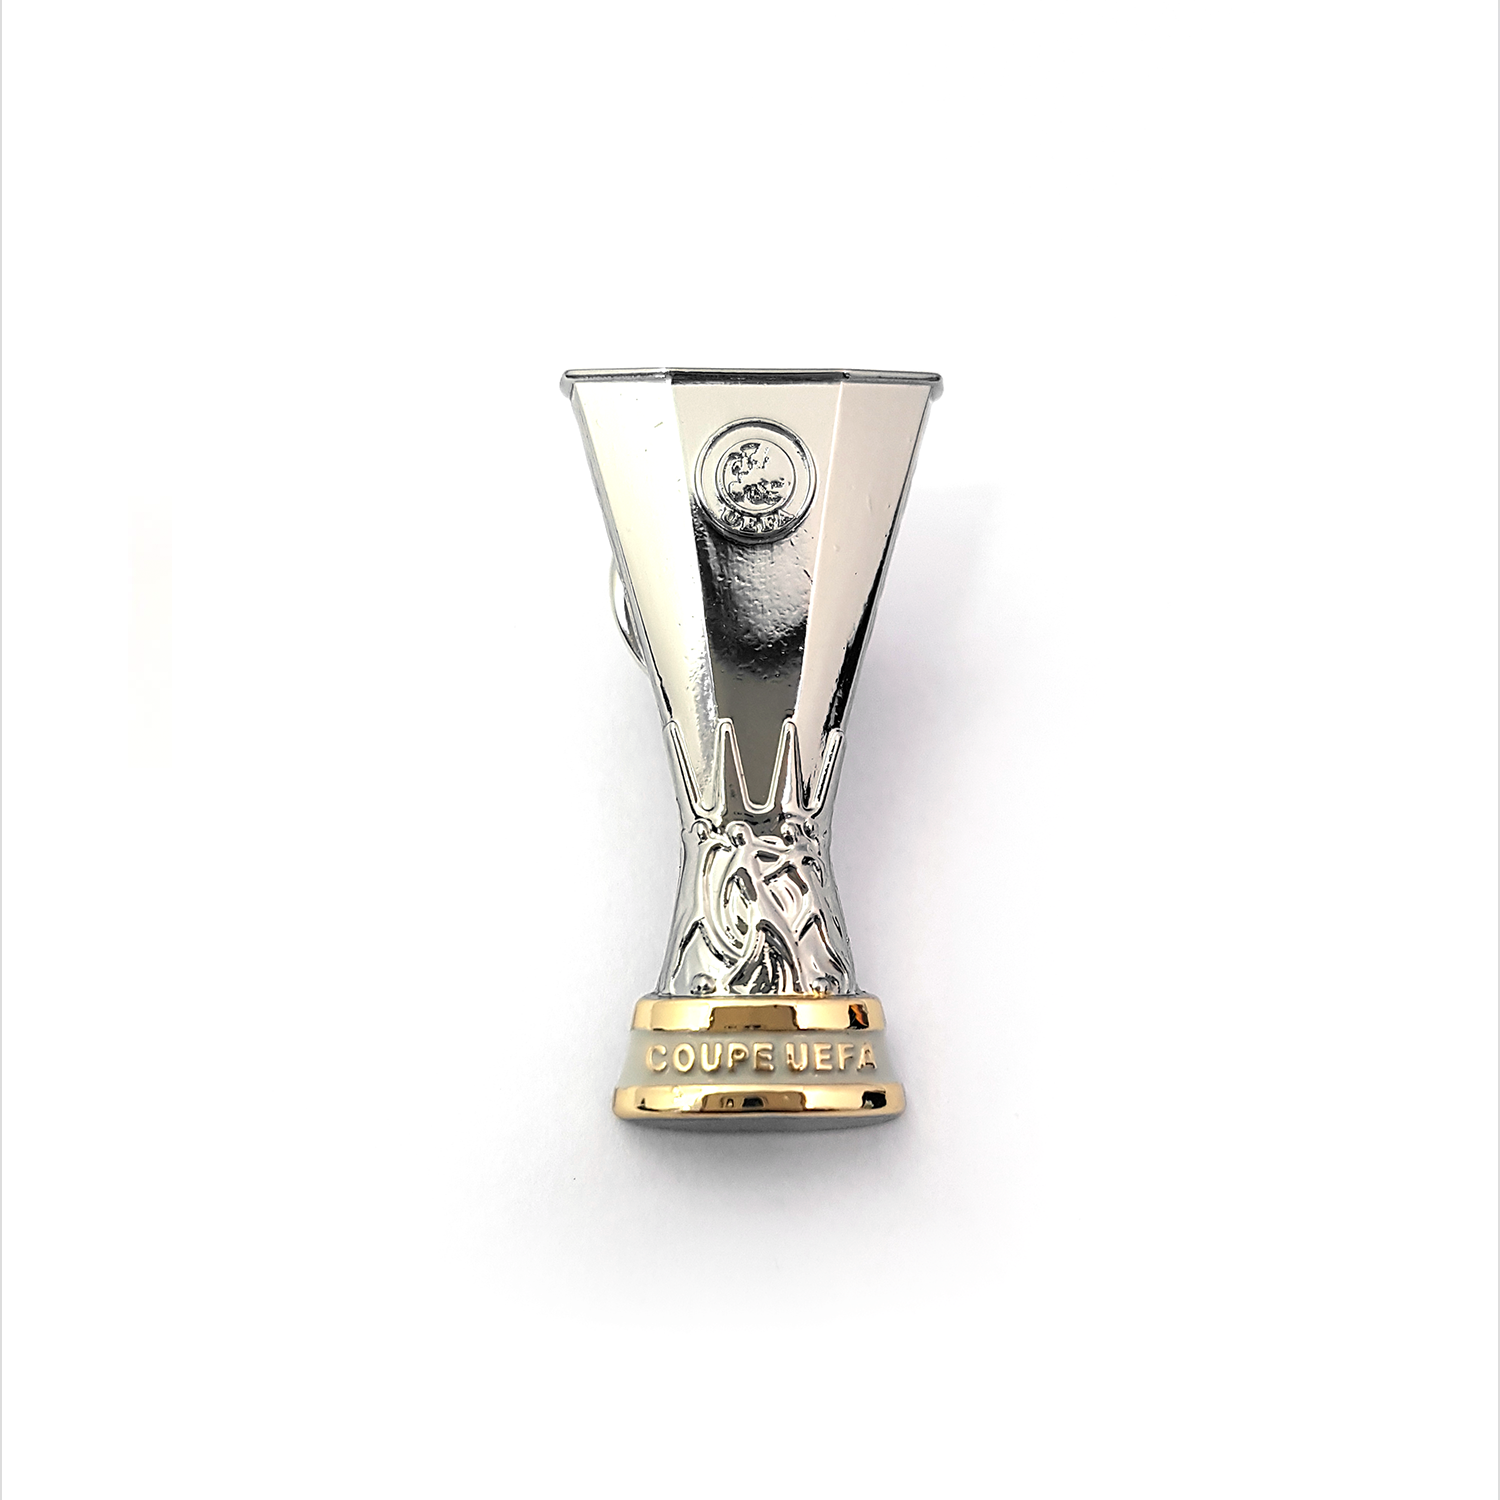 UEFA Europa League Pin Badge UEFA Club Competitions Online Store